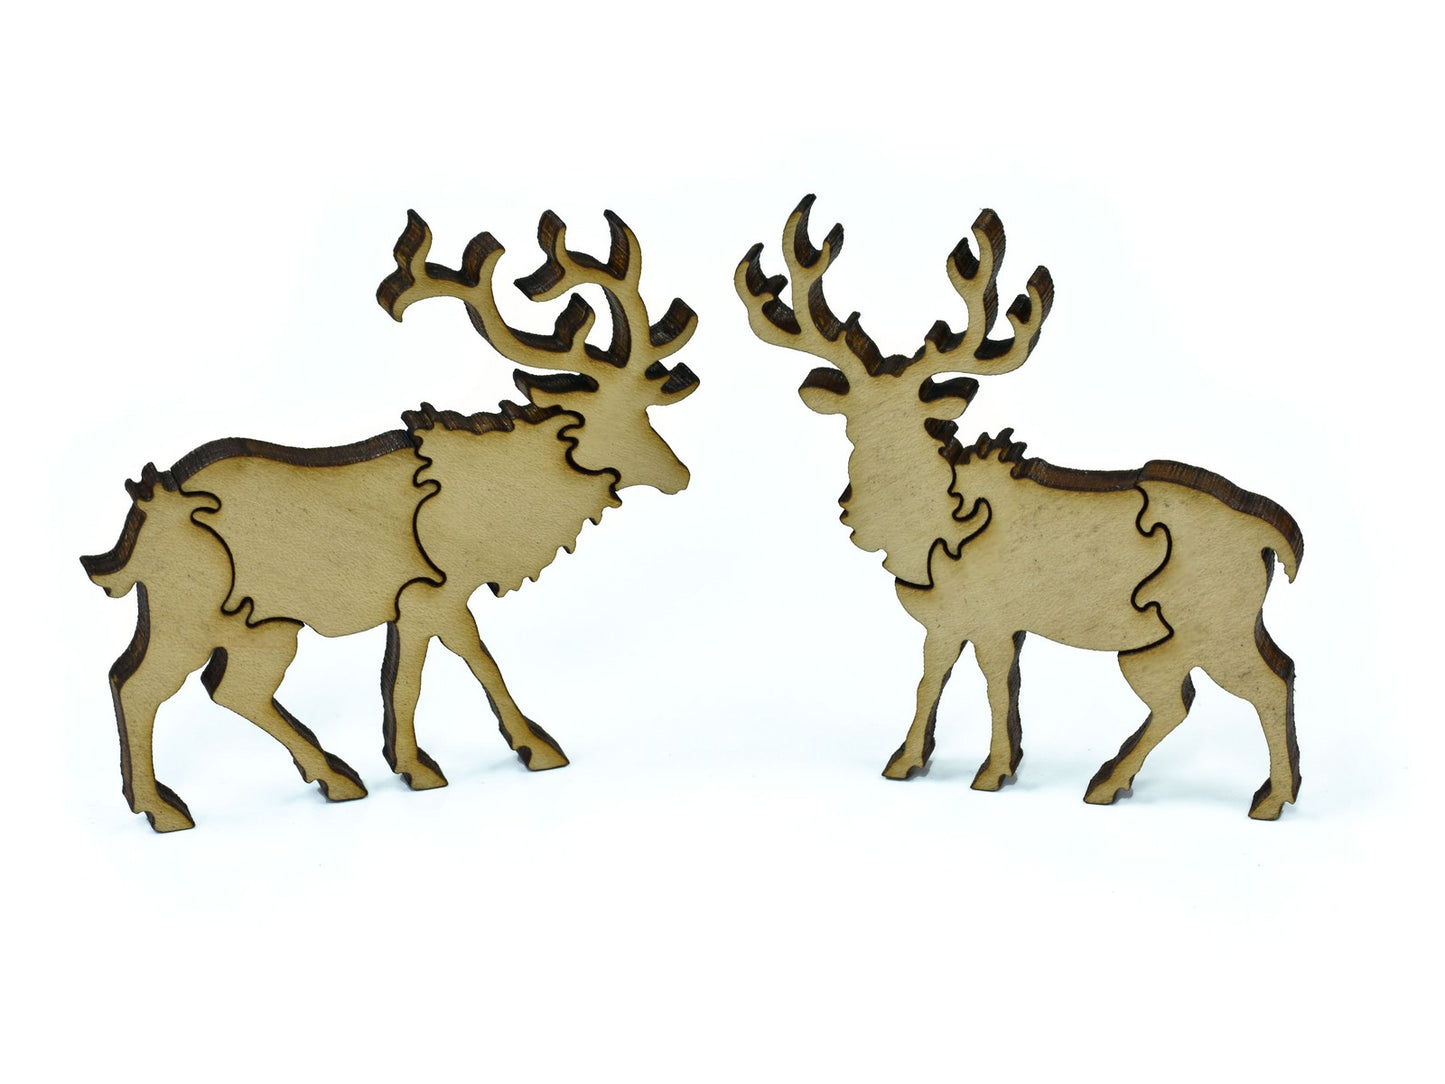 A closeup of pieces in the shape of two deer.